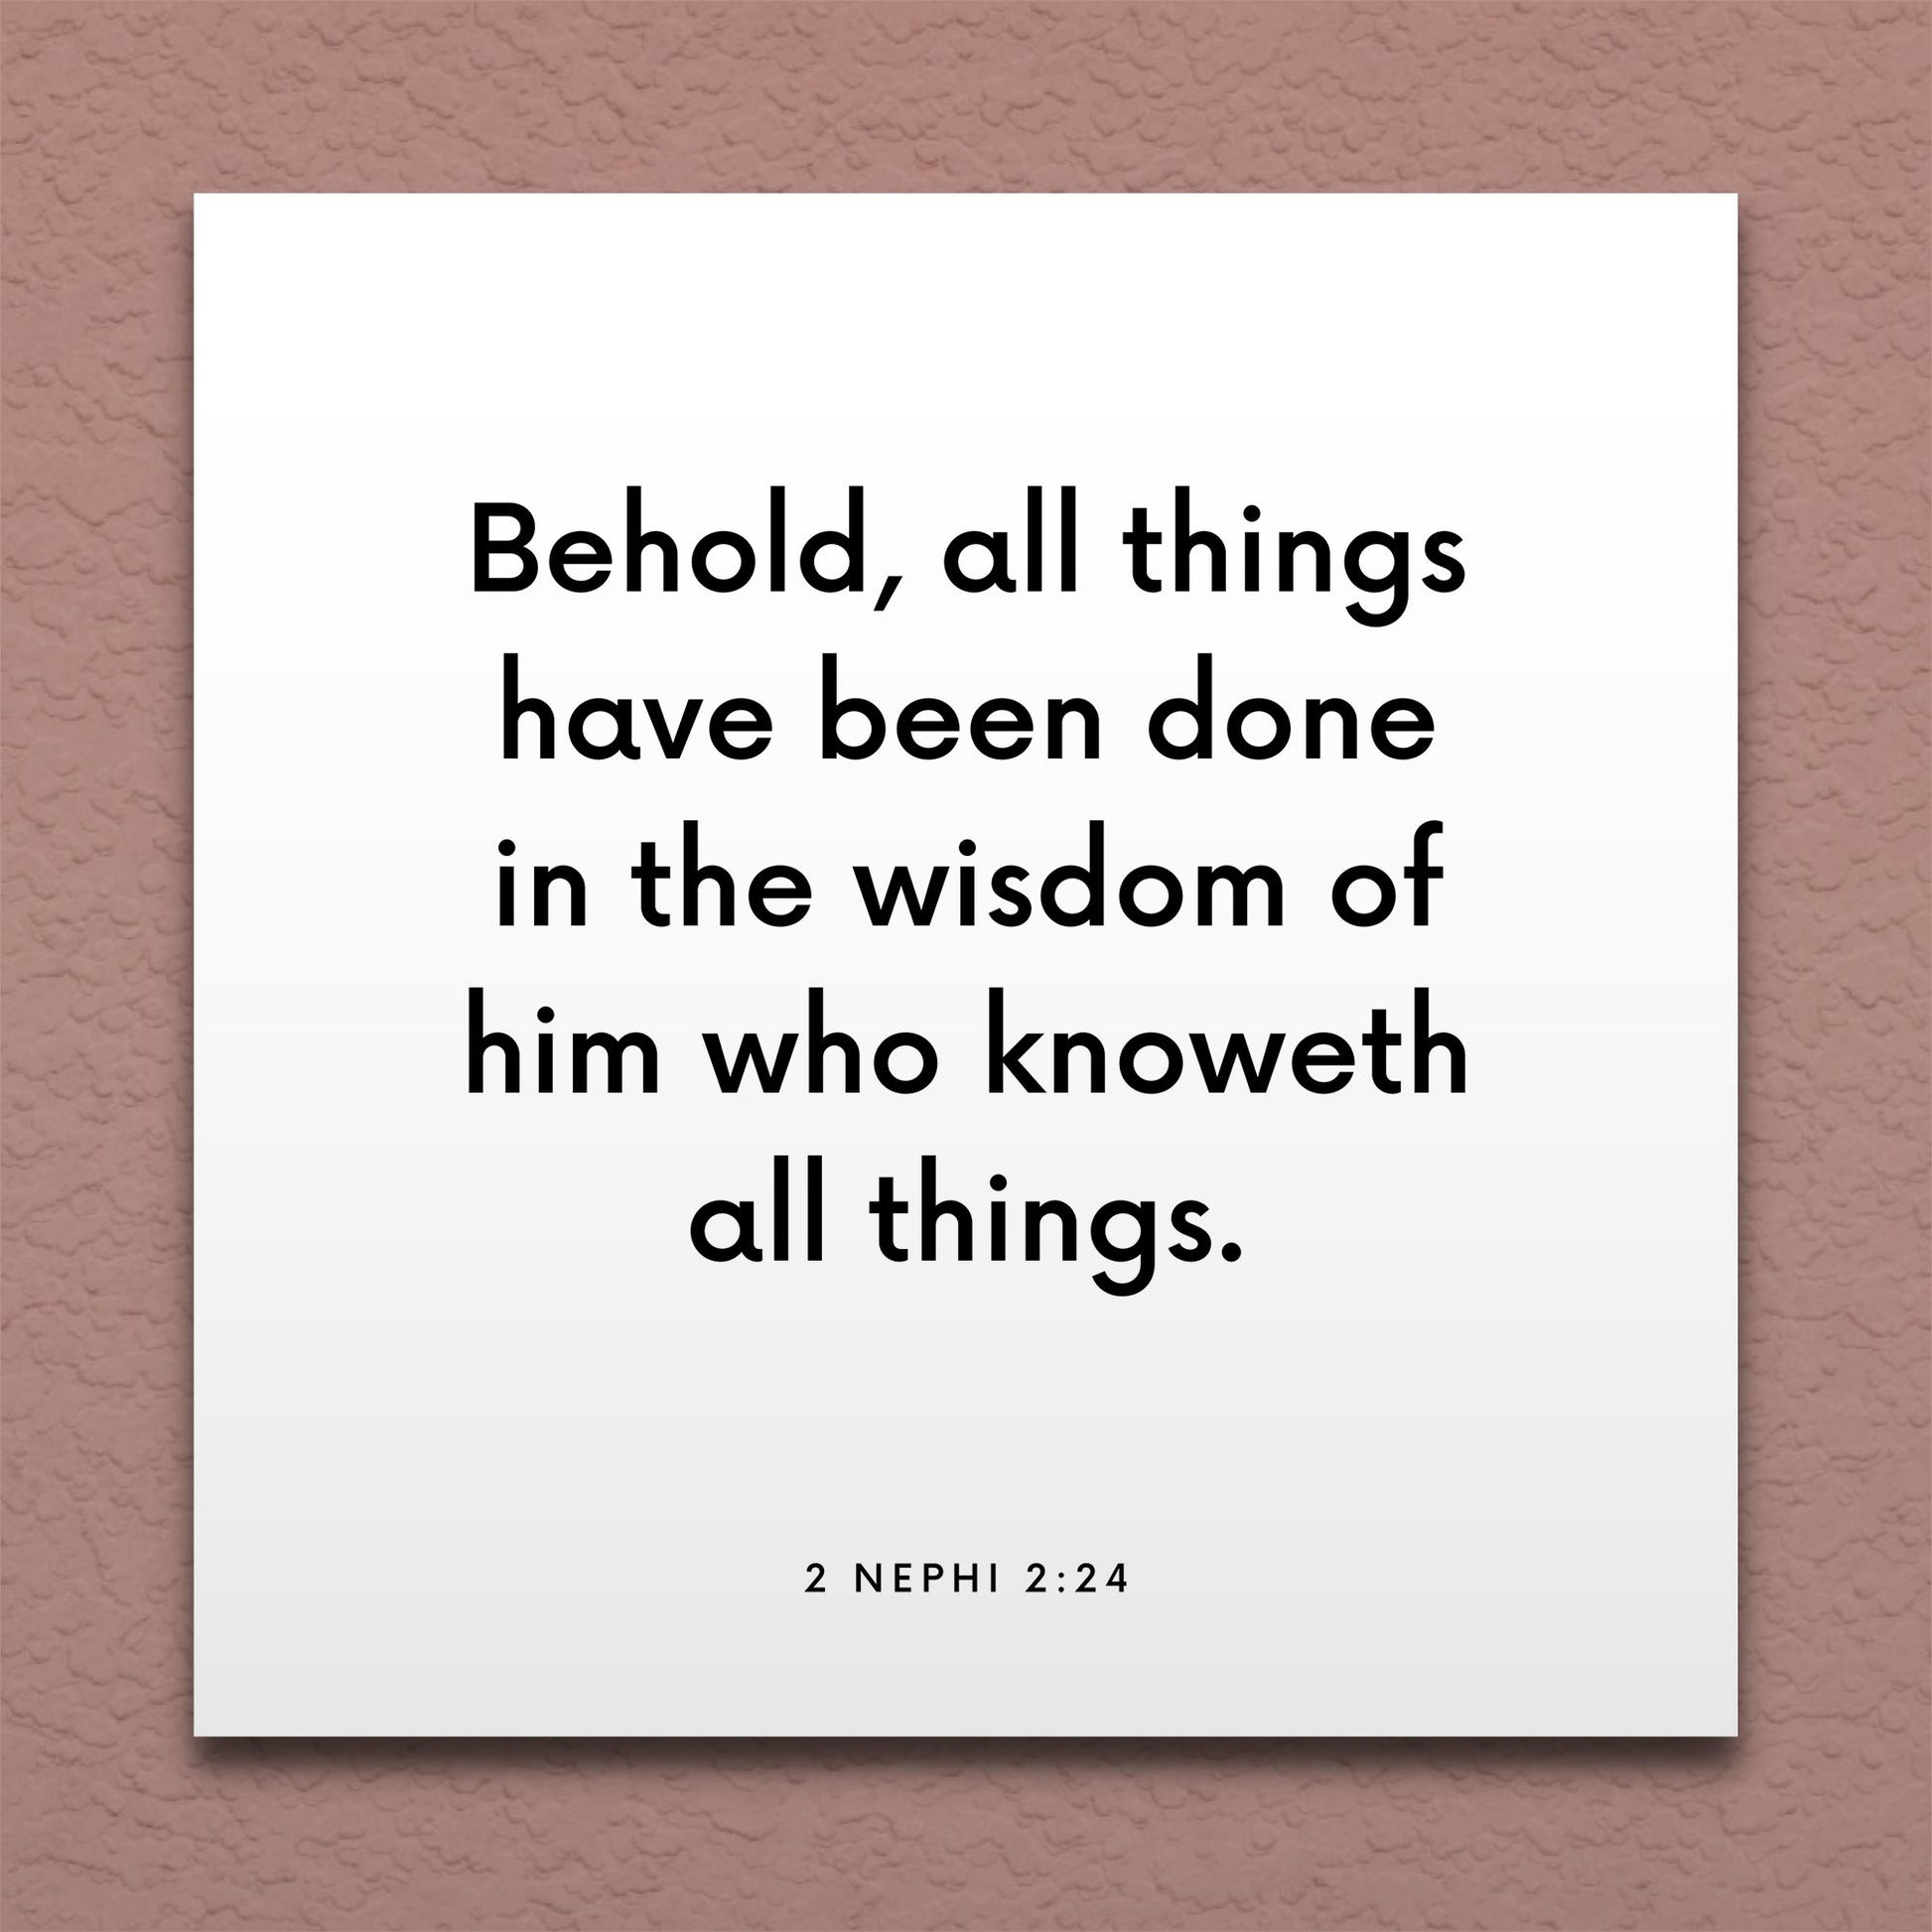 Wall-mounted scripture tile for 2 Nephi 2:24 - "All things have been done in the wisdom of him who knoweth"